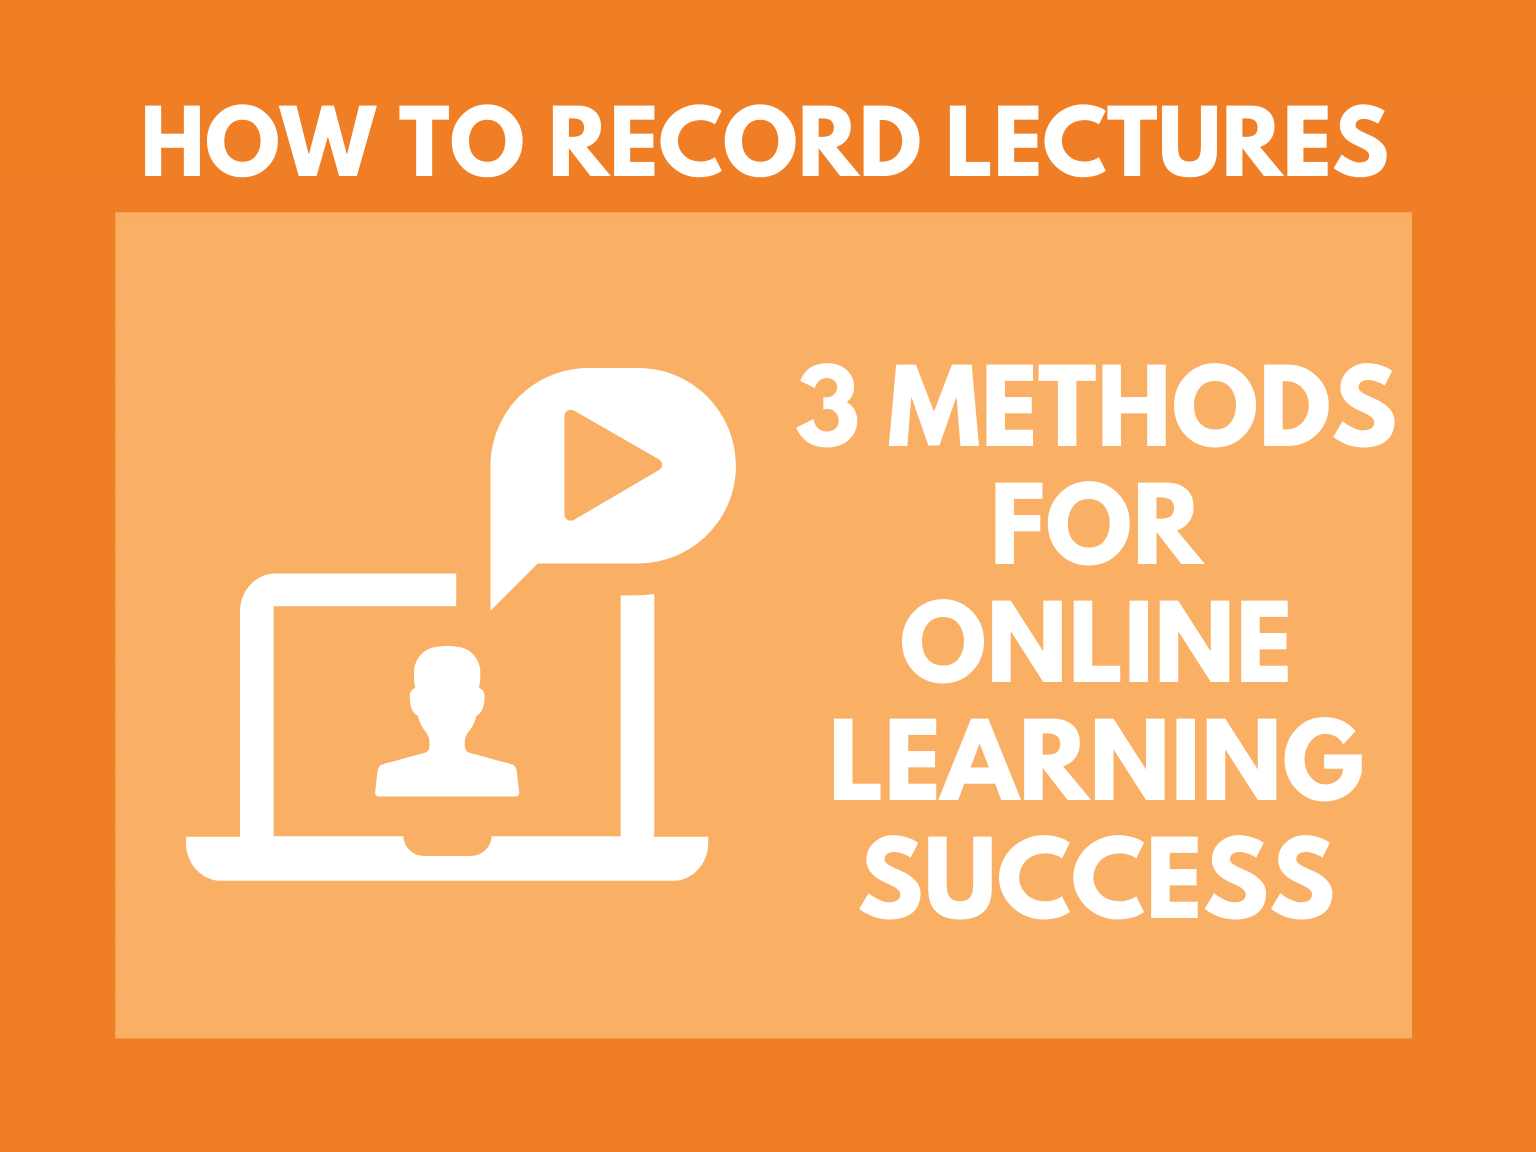 is it okay to record lectures